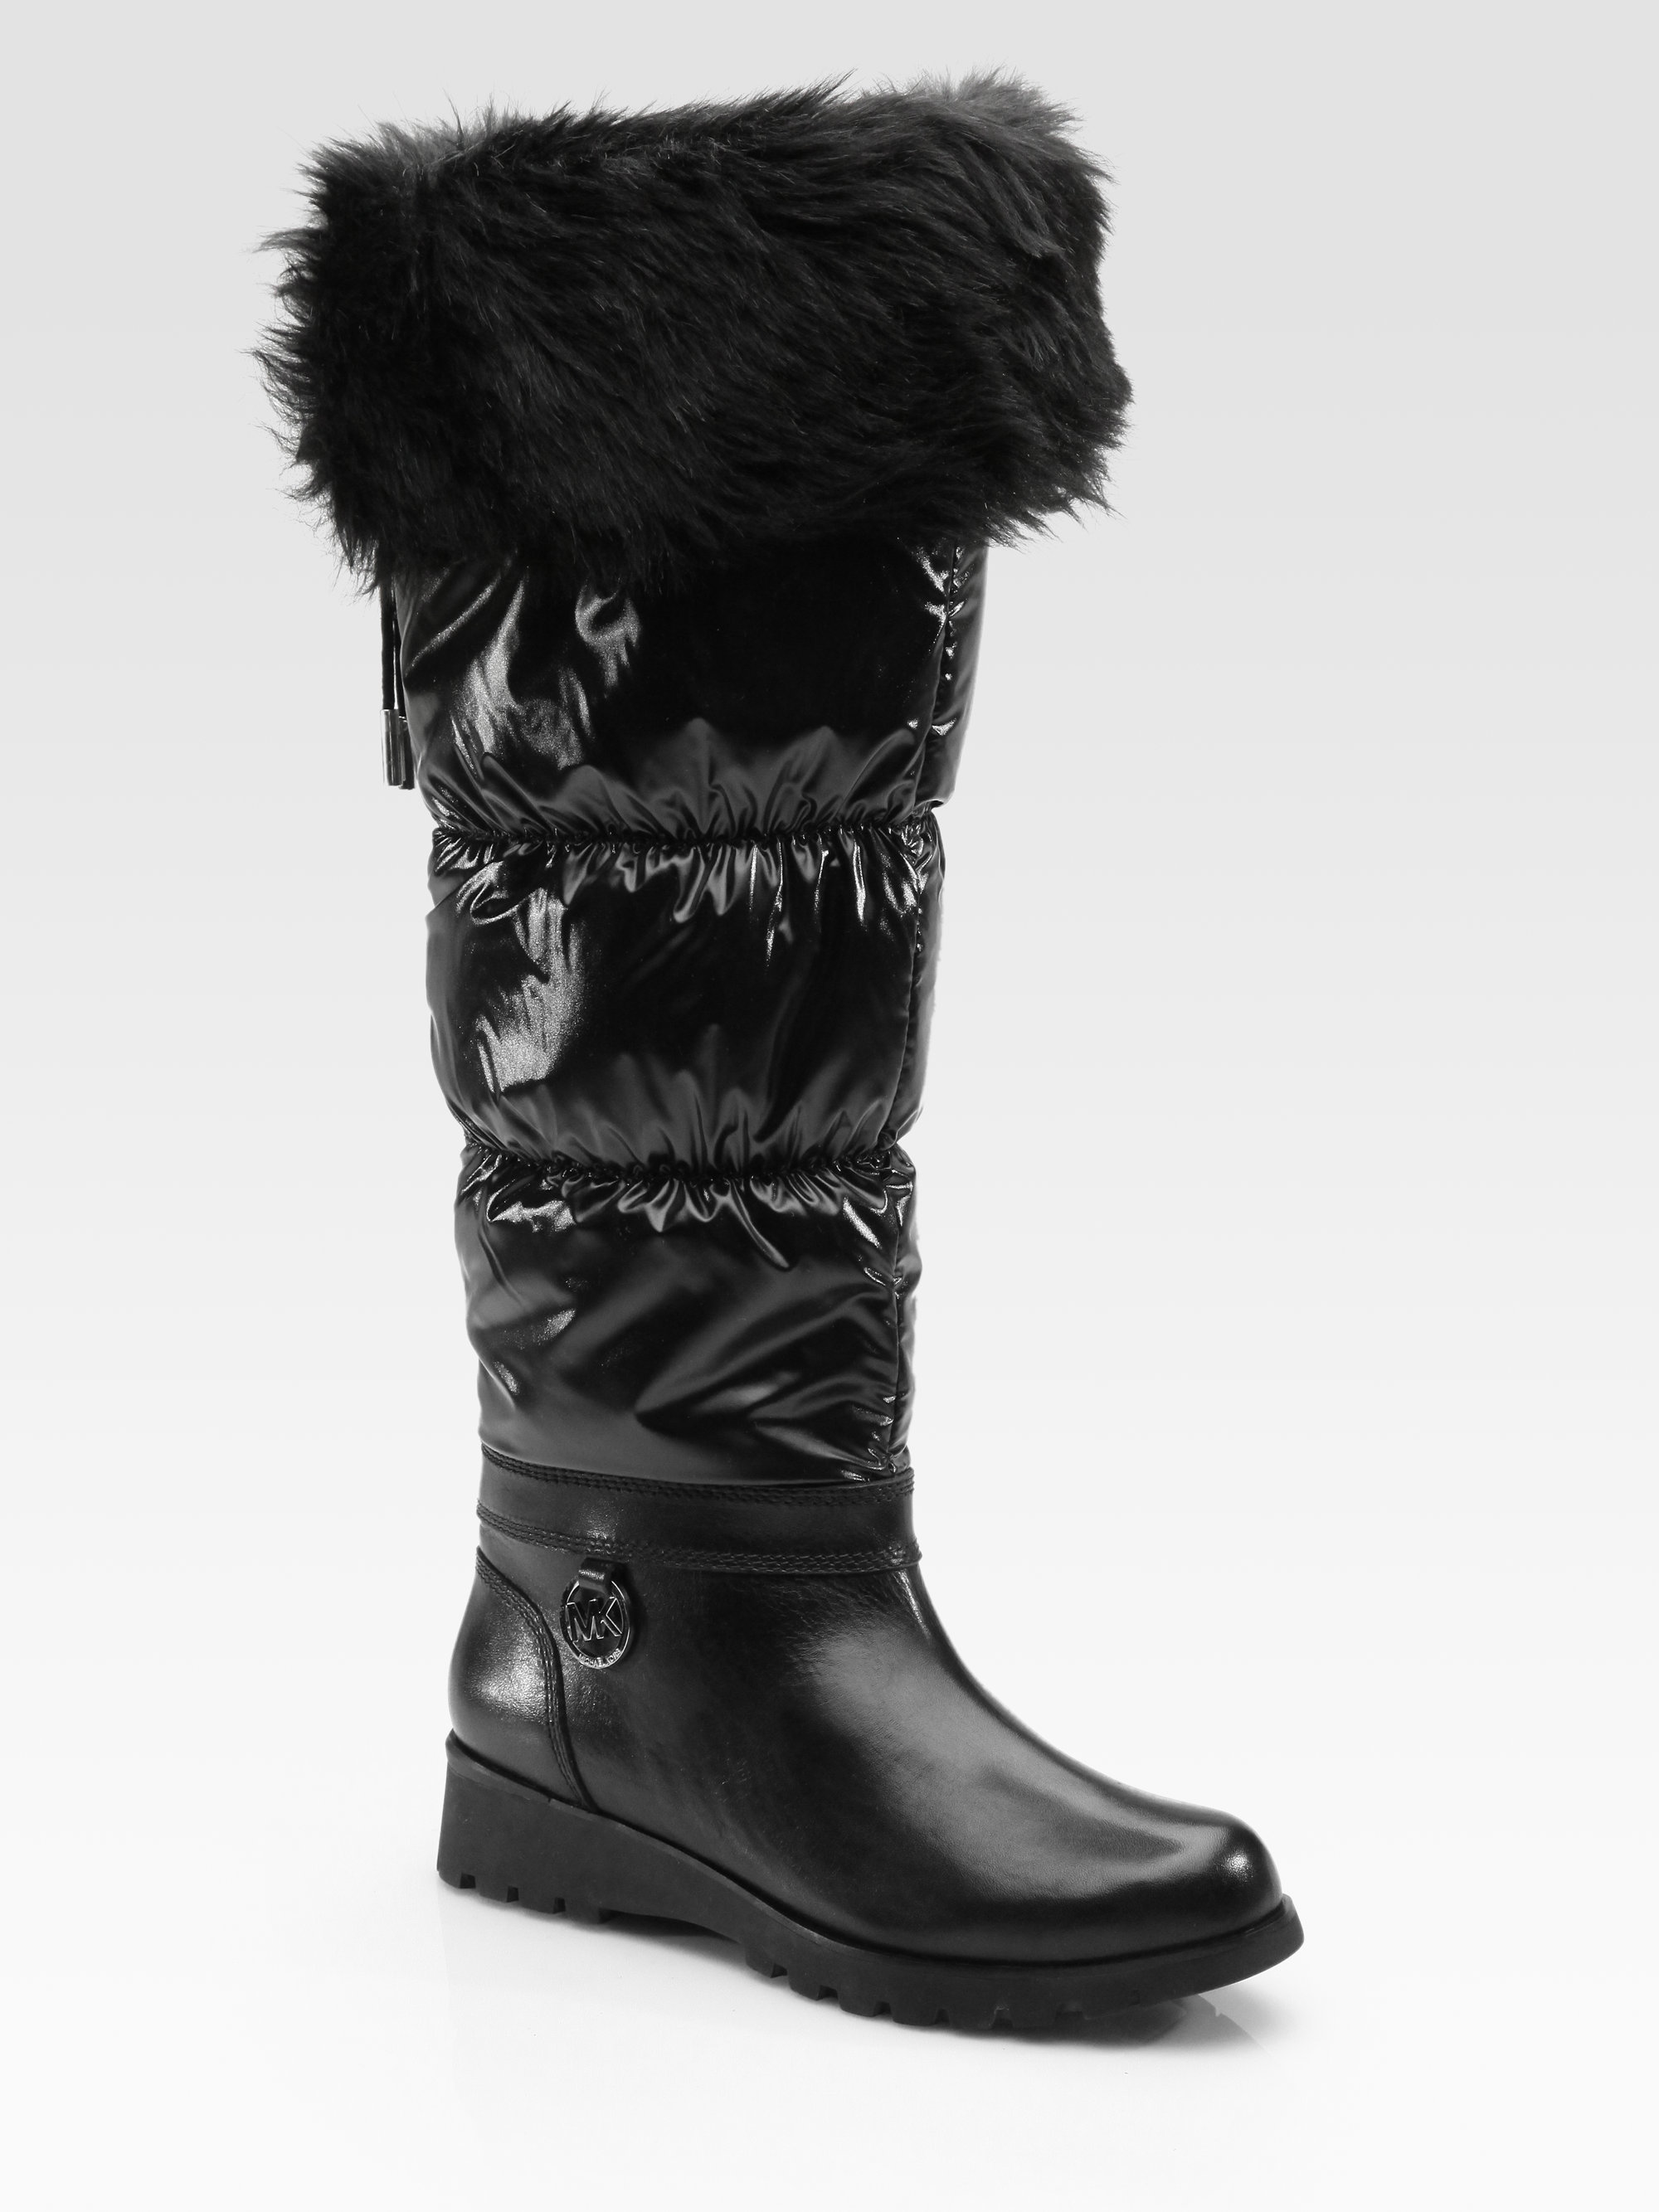 Lyst - Michael Michael Kors Brandy Nylon and Leather Snow Boots in Black